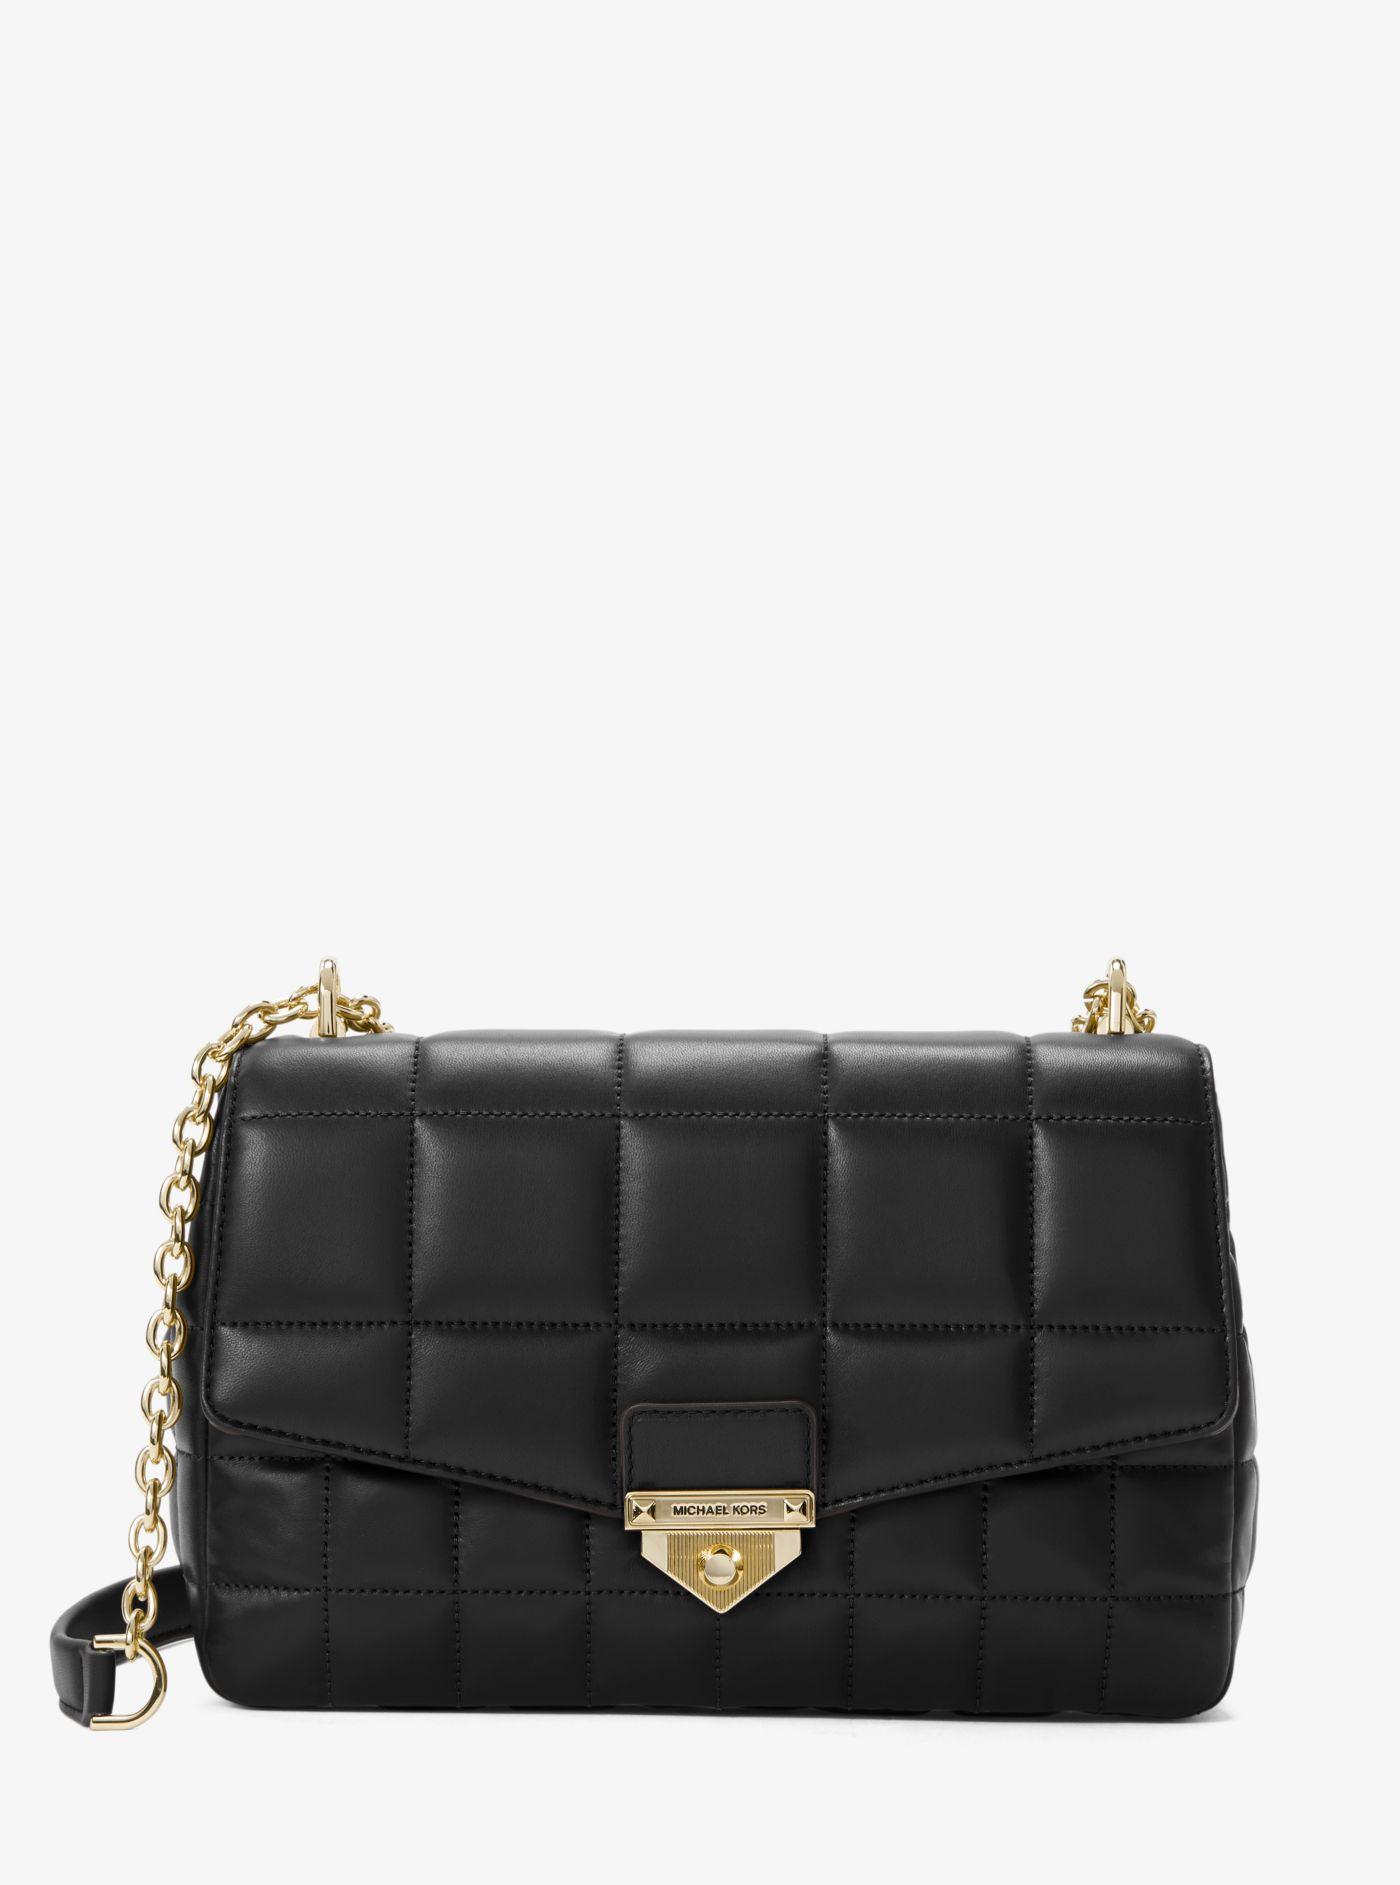 Michael Kors Soho Extra-large Quilted Leather Shoulder Bag in Black - Lyst